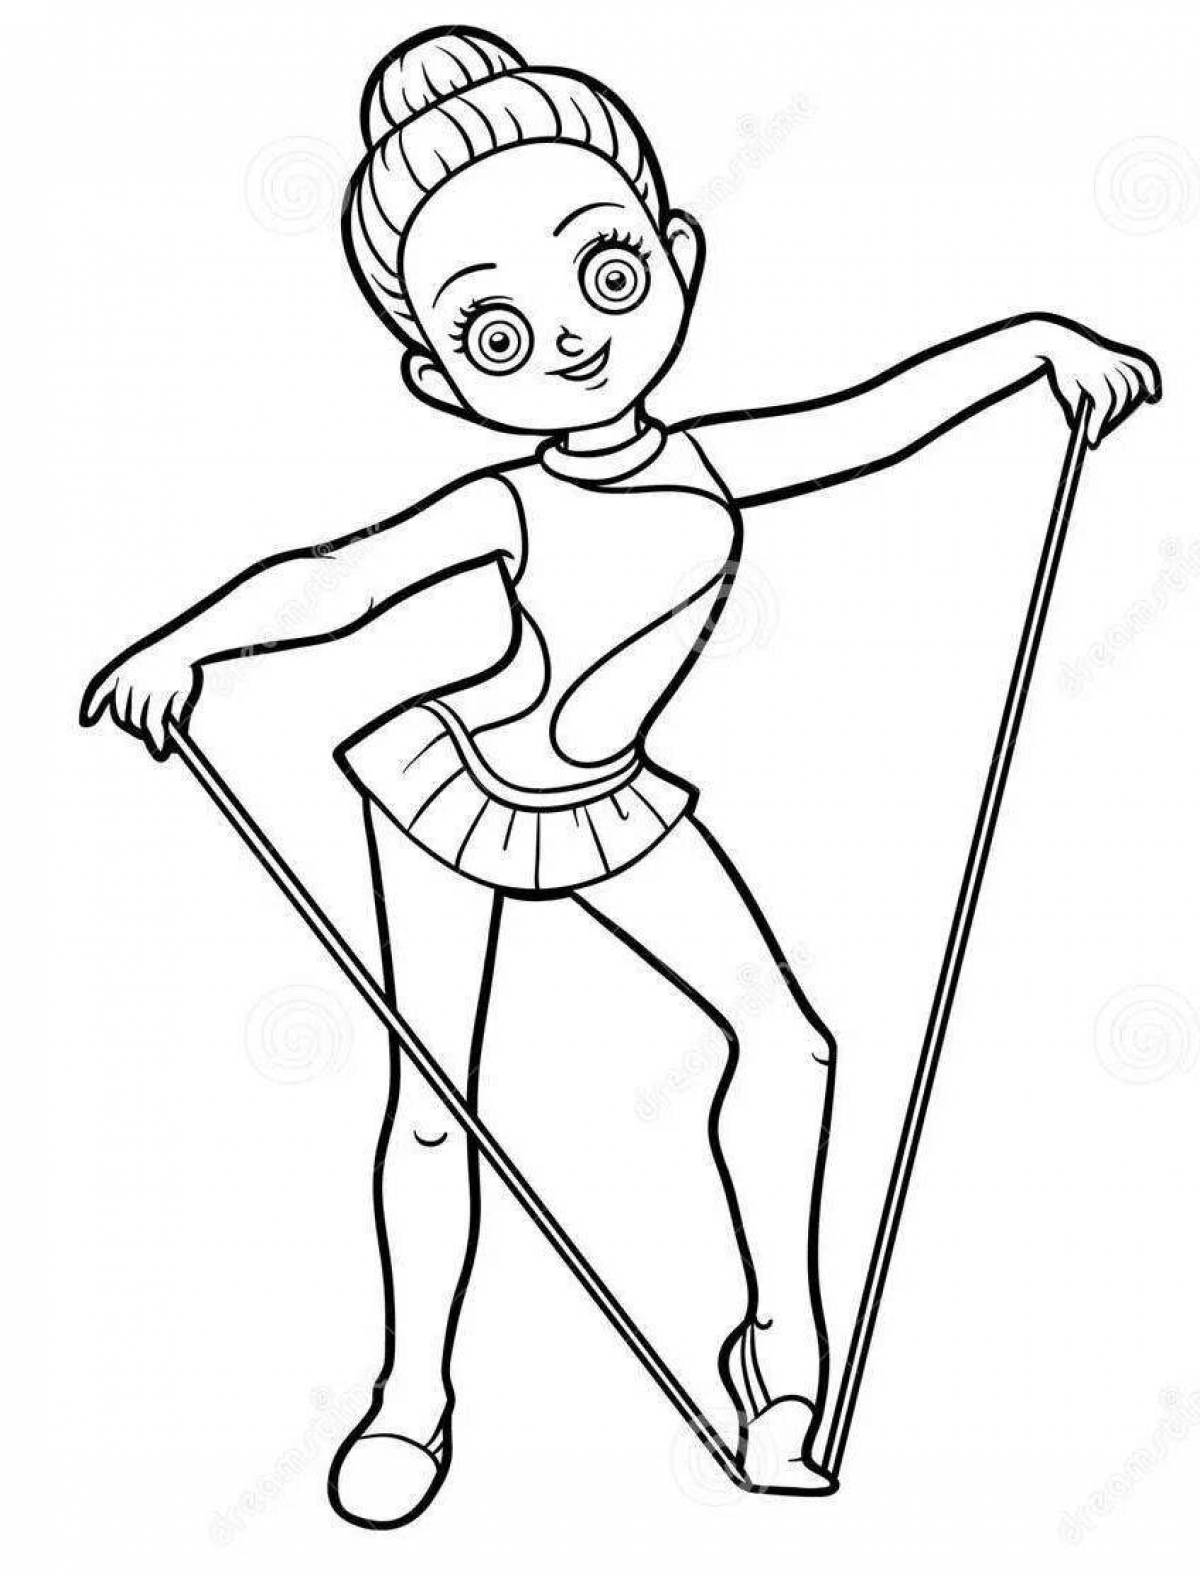 Dynamic gymnast coloring book for kids